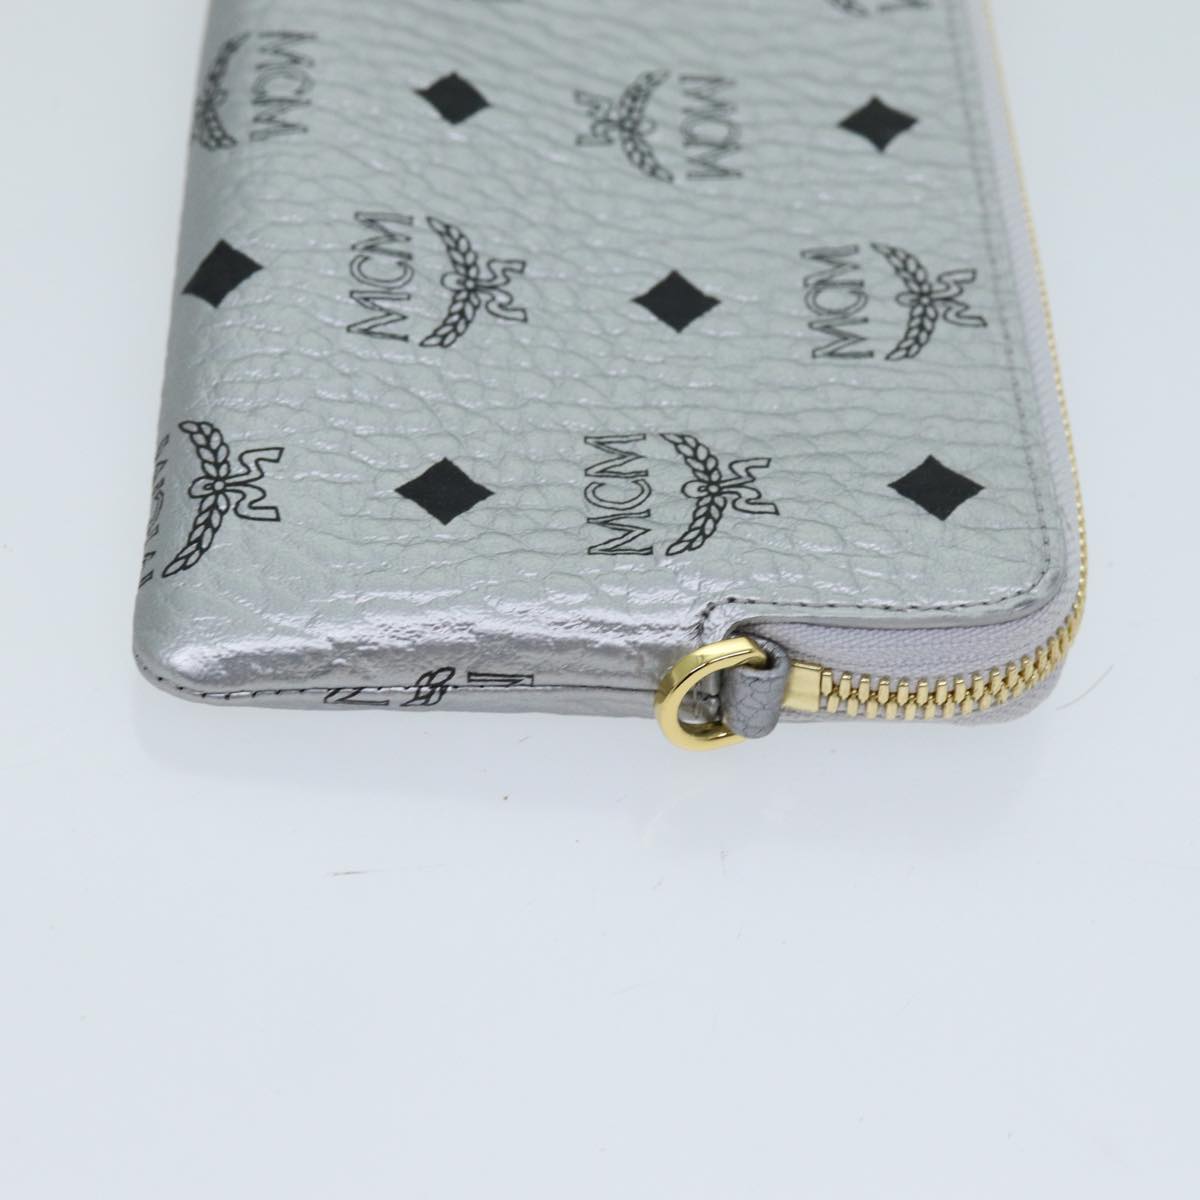 MCM Vicetos Logogram Accessory Pouch PVC Silver Auth 69723A